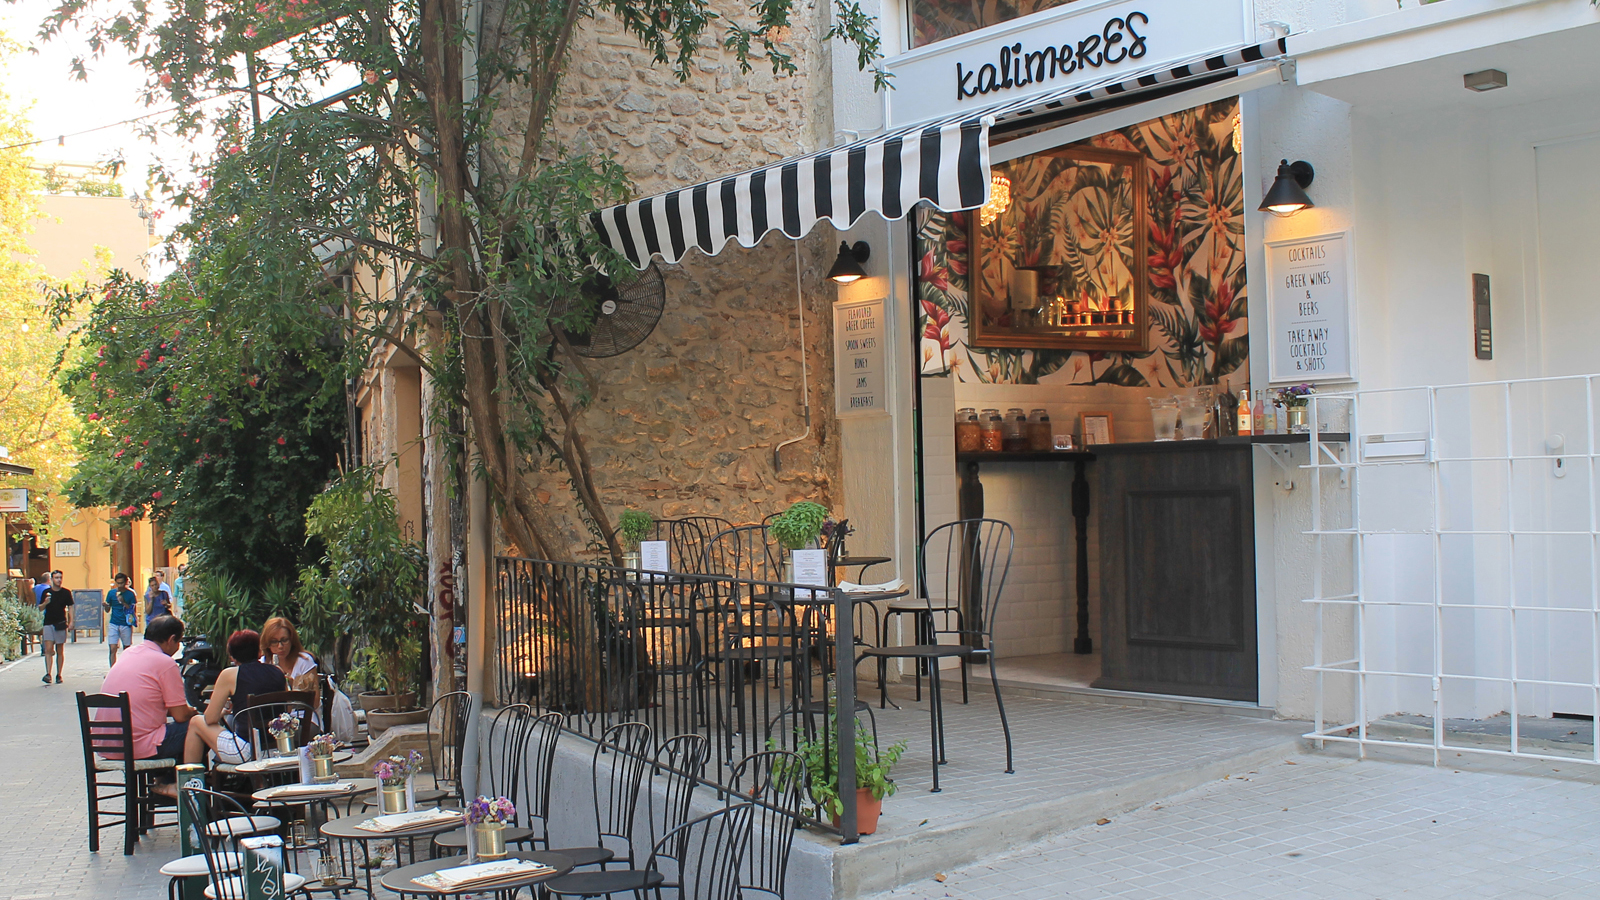 Breakfast and coffee at kalimeres while in Athens